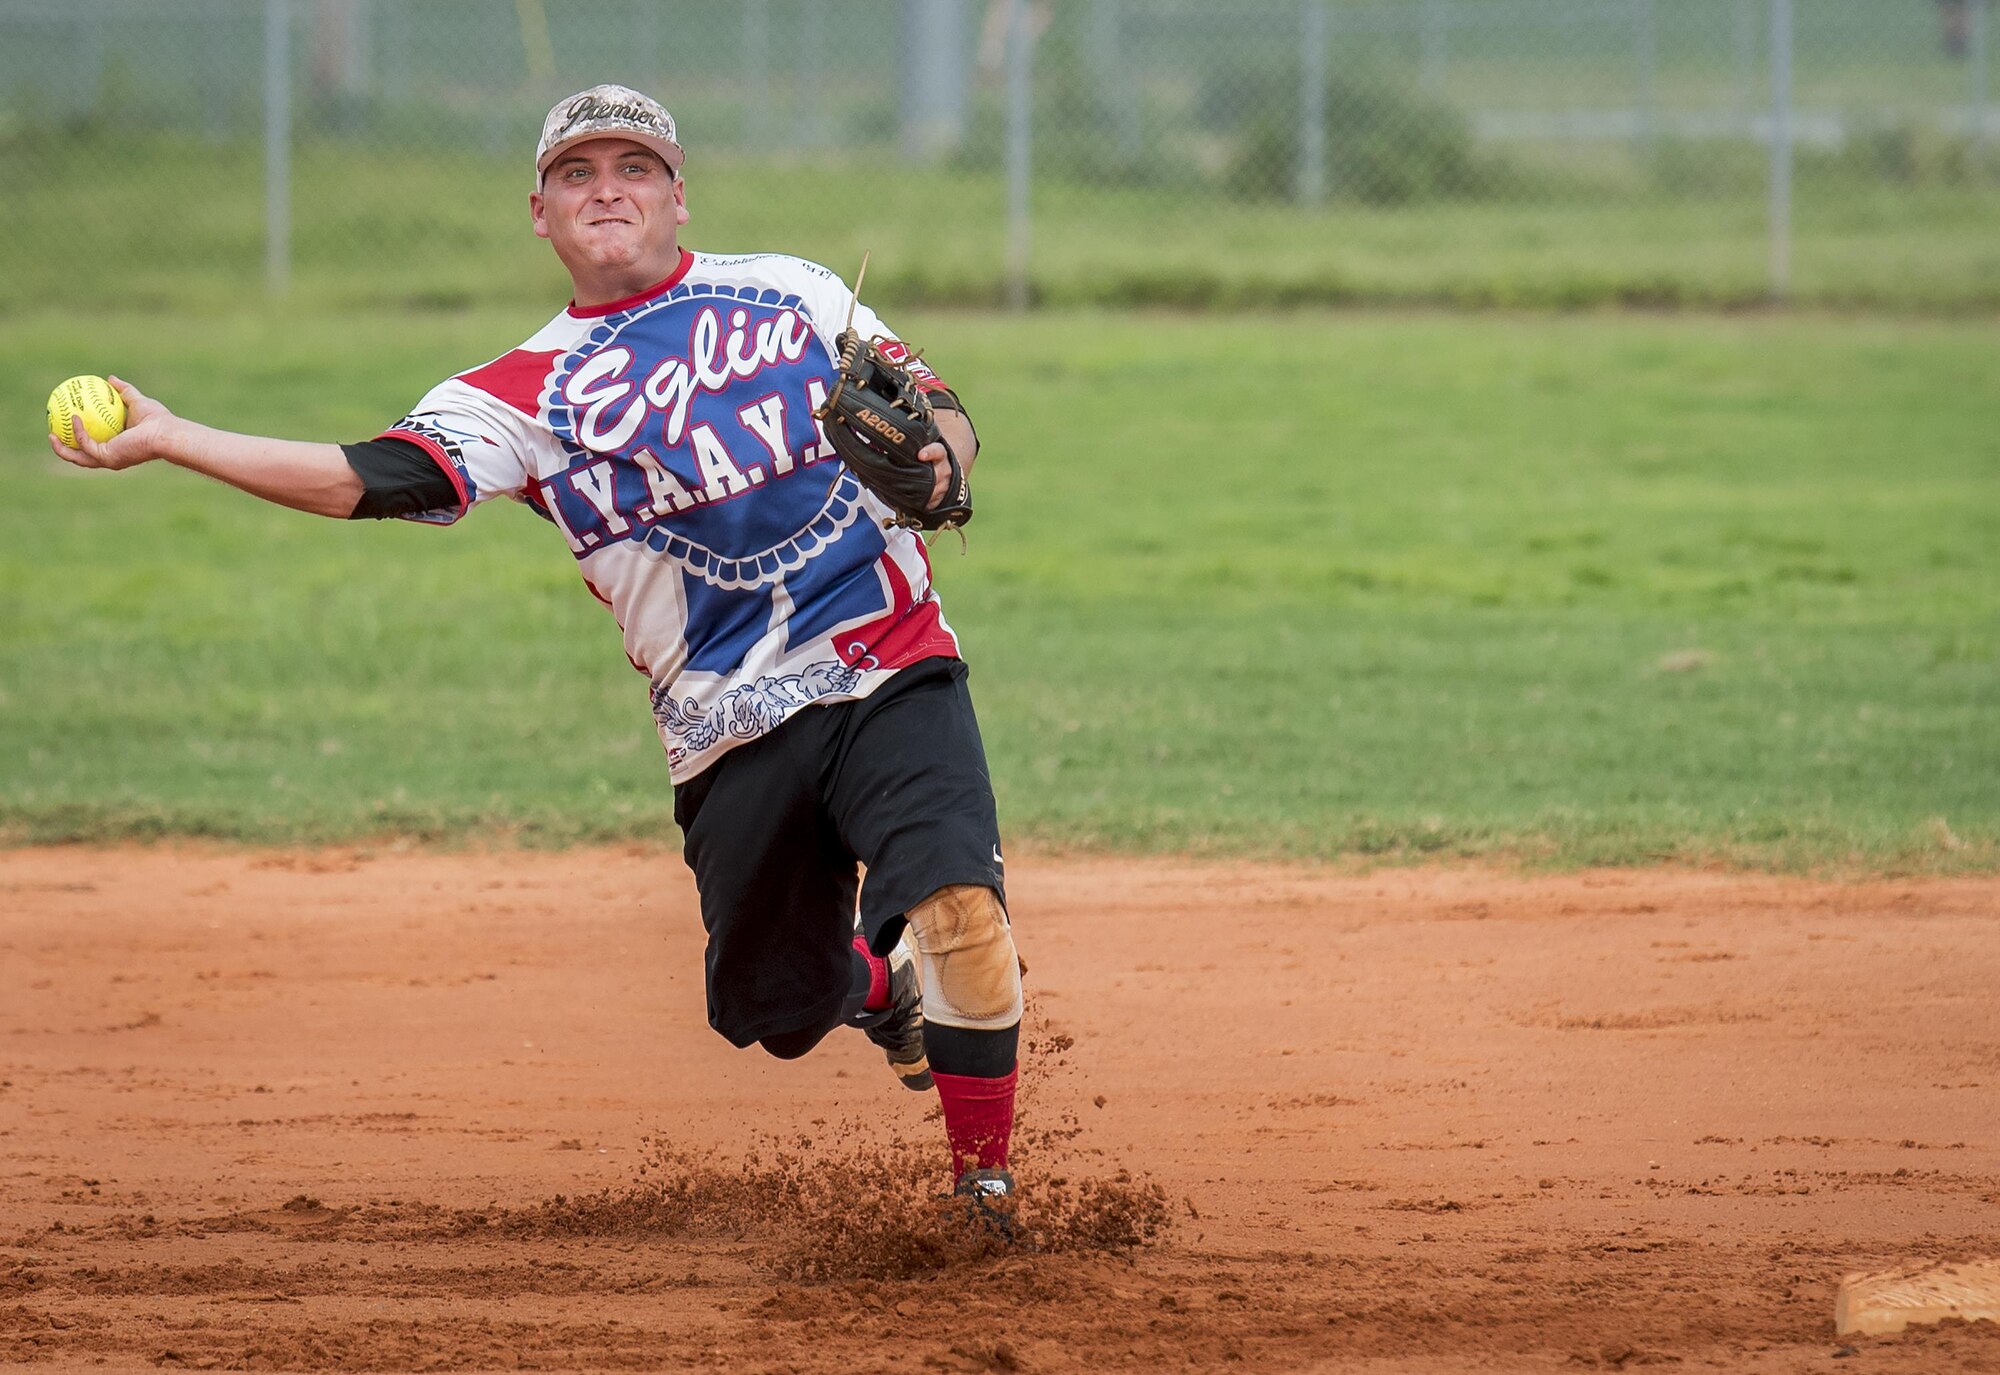 Tyler Leemon, 96th Maintenance Squadron softball team shortstop, slings a throw to first base during an intramural game against the 359th Training Squadron team July 17 at Eglin Air Force Base, Fla.  The league-leading Maintainers pounded the training squadron 10-5 to improve to 9-1 on the season.  (U.S. Air Force photo/Samuel King Jr.)